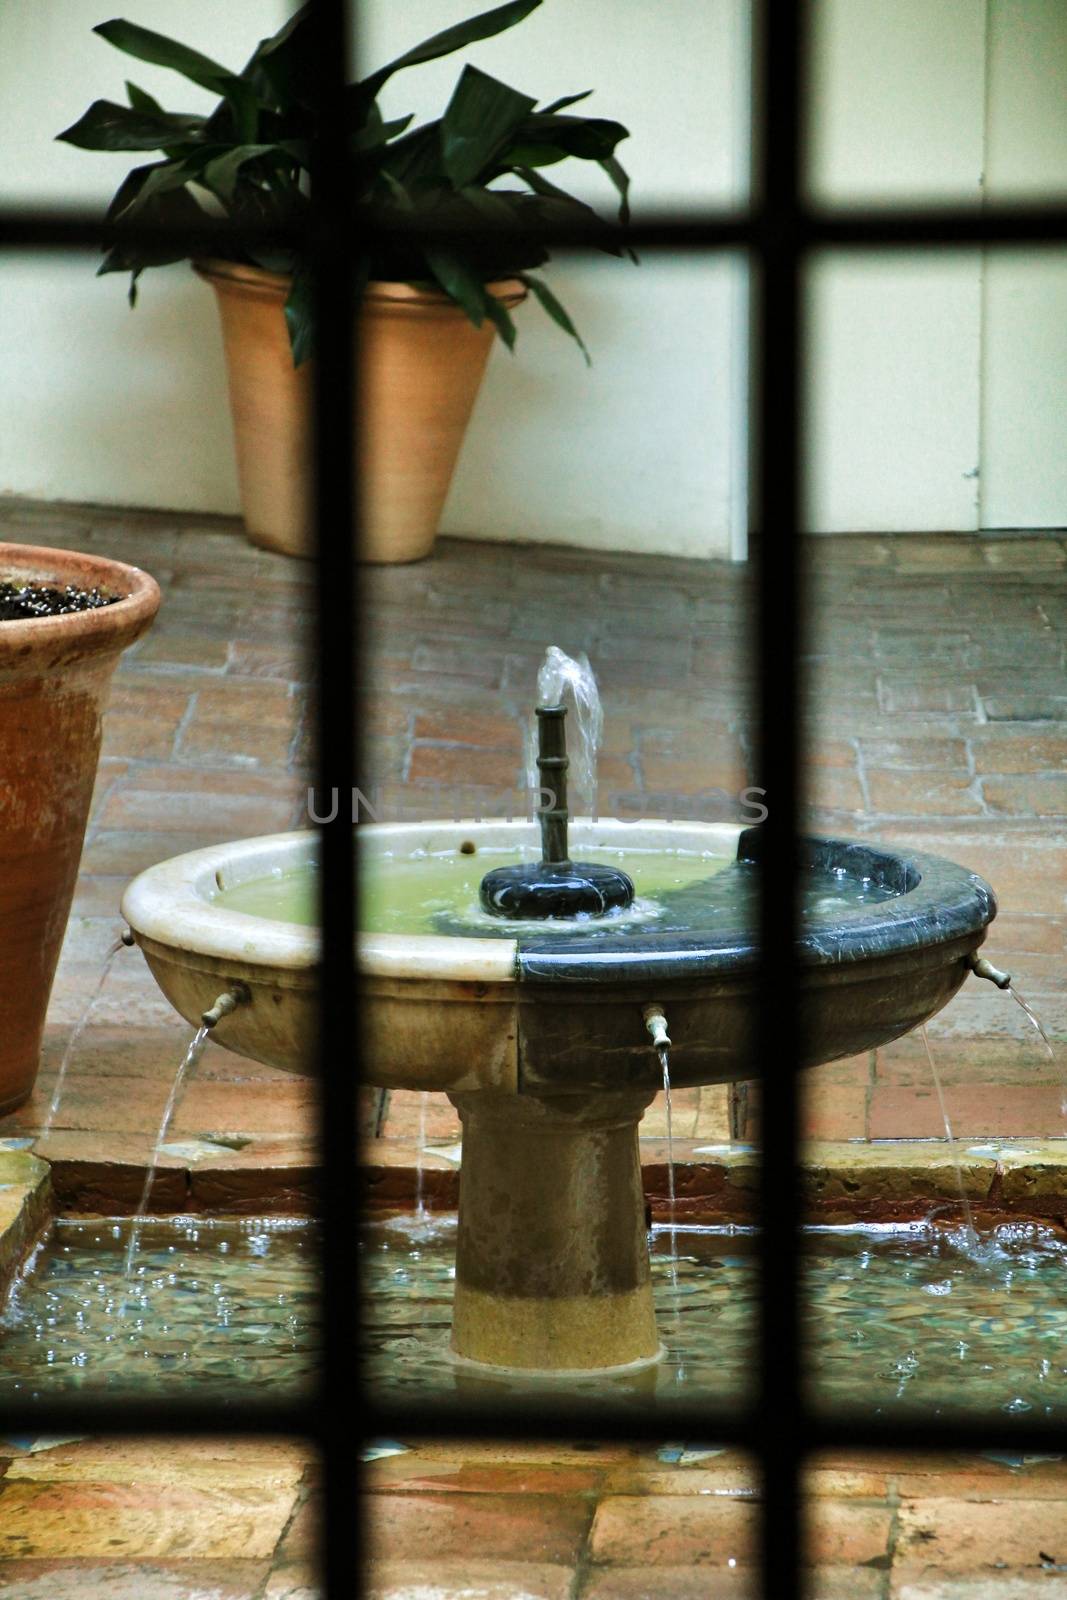 Decorative fountain in an andalusian patio in a house of Cordoba, Spain